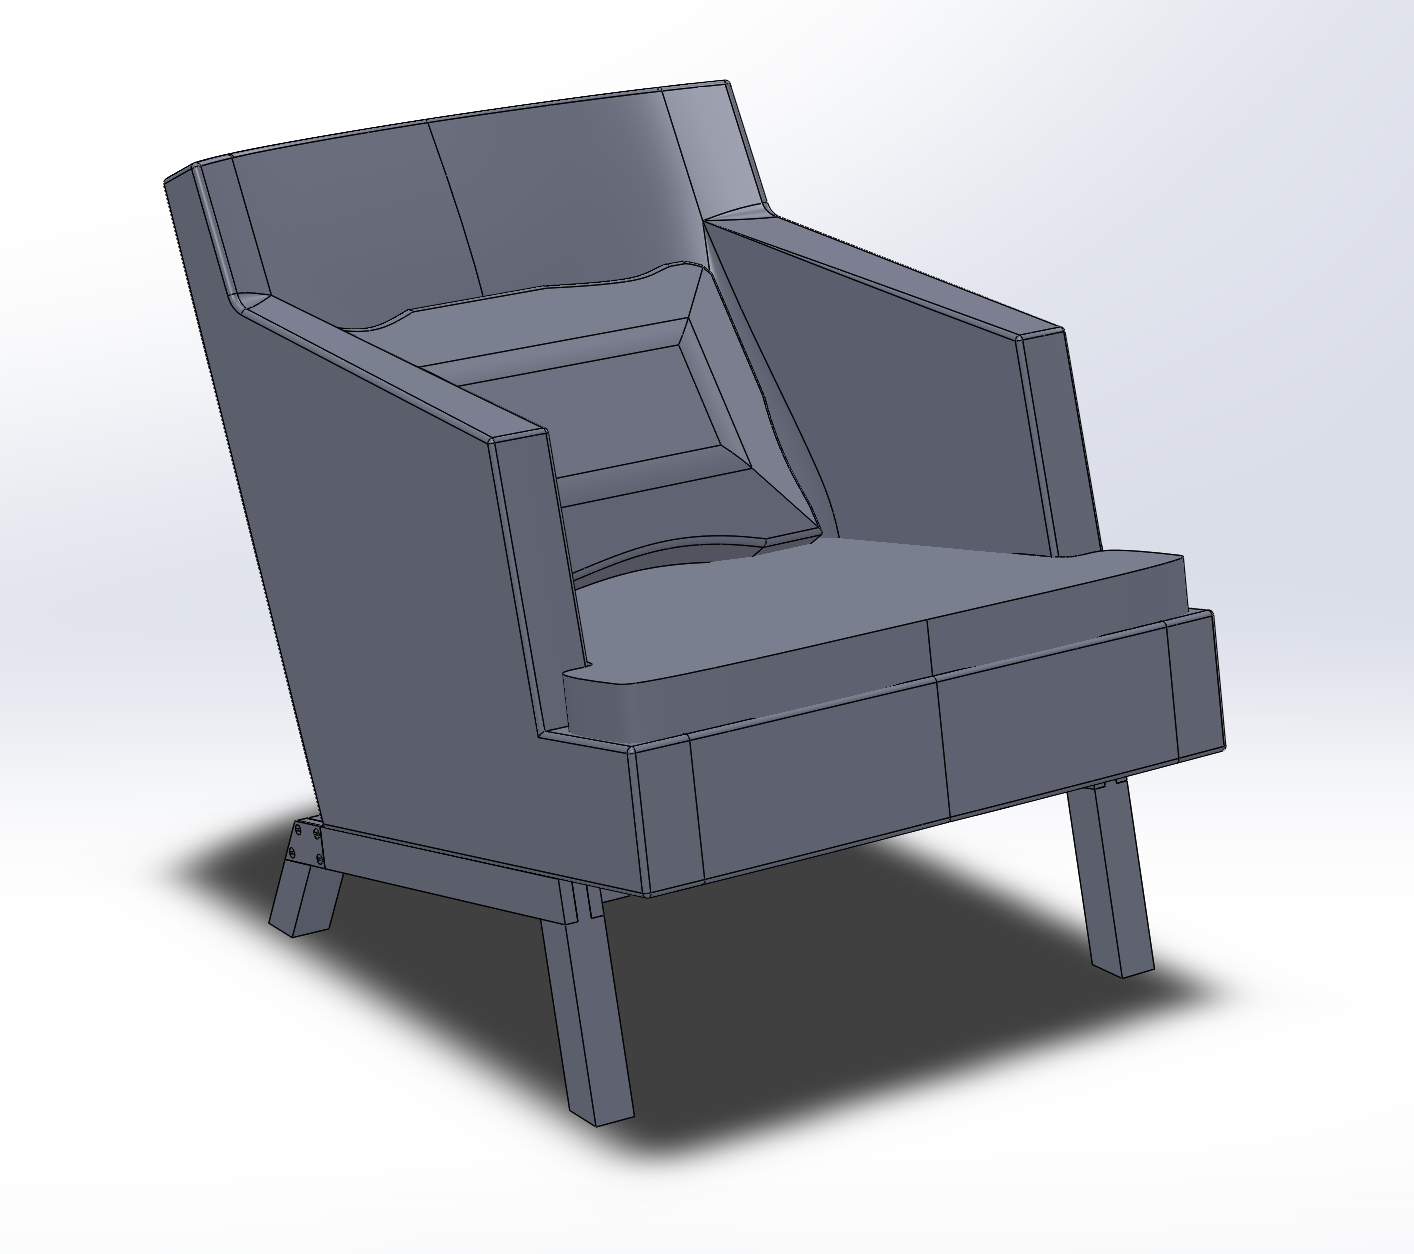 CAD model of an armchair made in Solidworks.